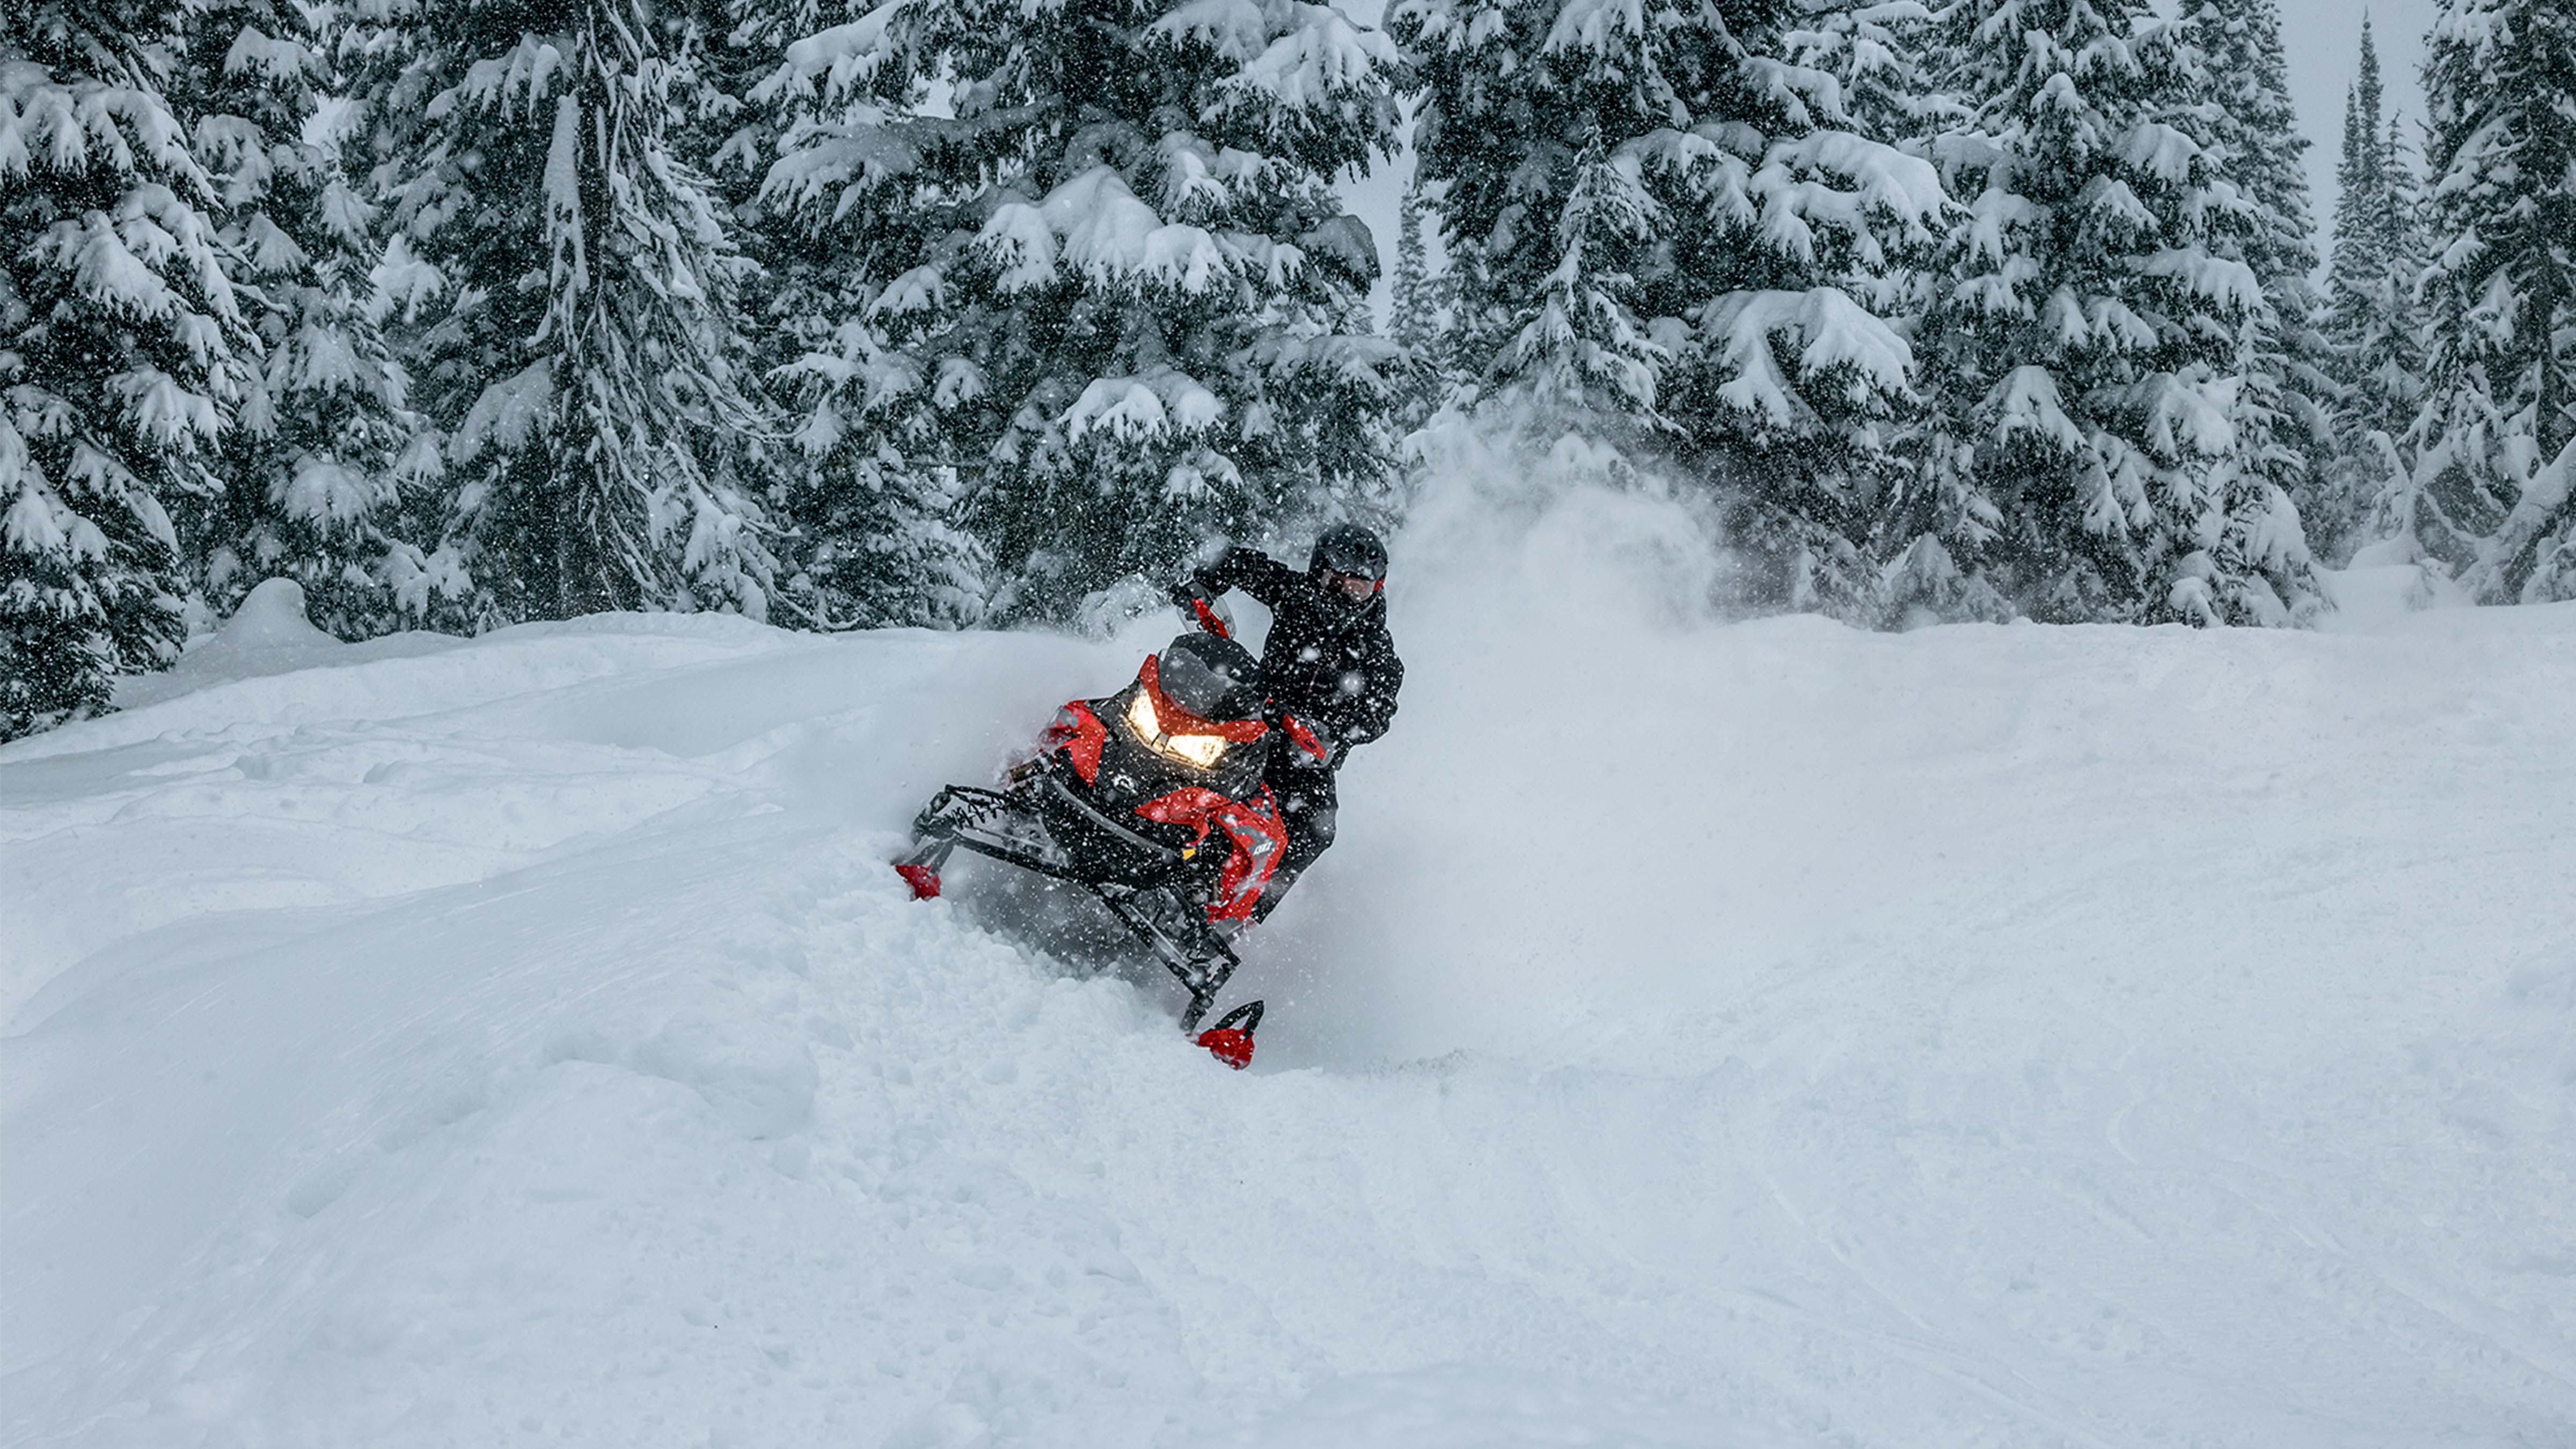 Lynx Rave RE snowmobile riding on snowy trail